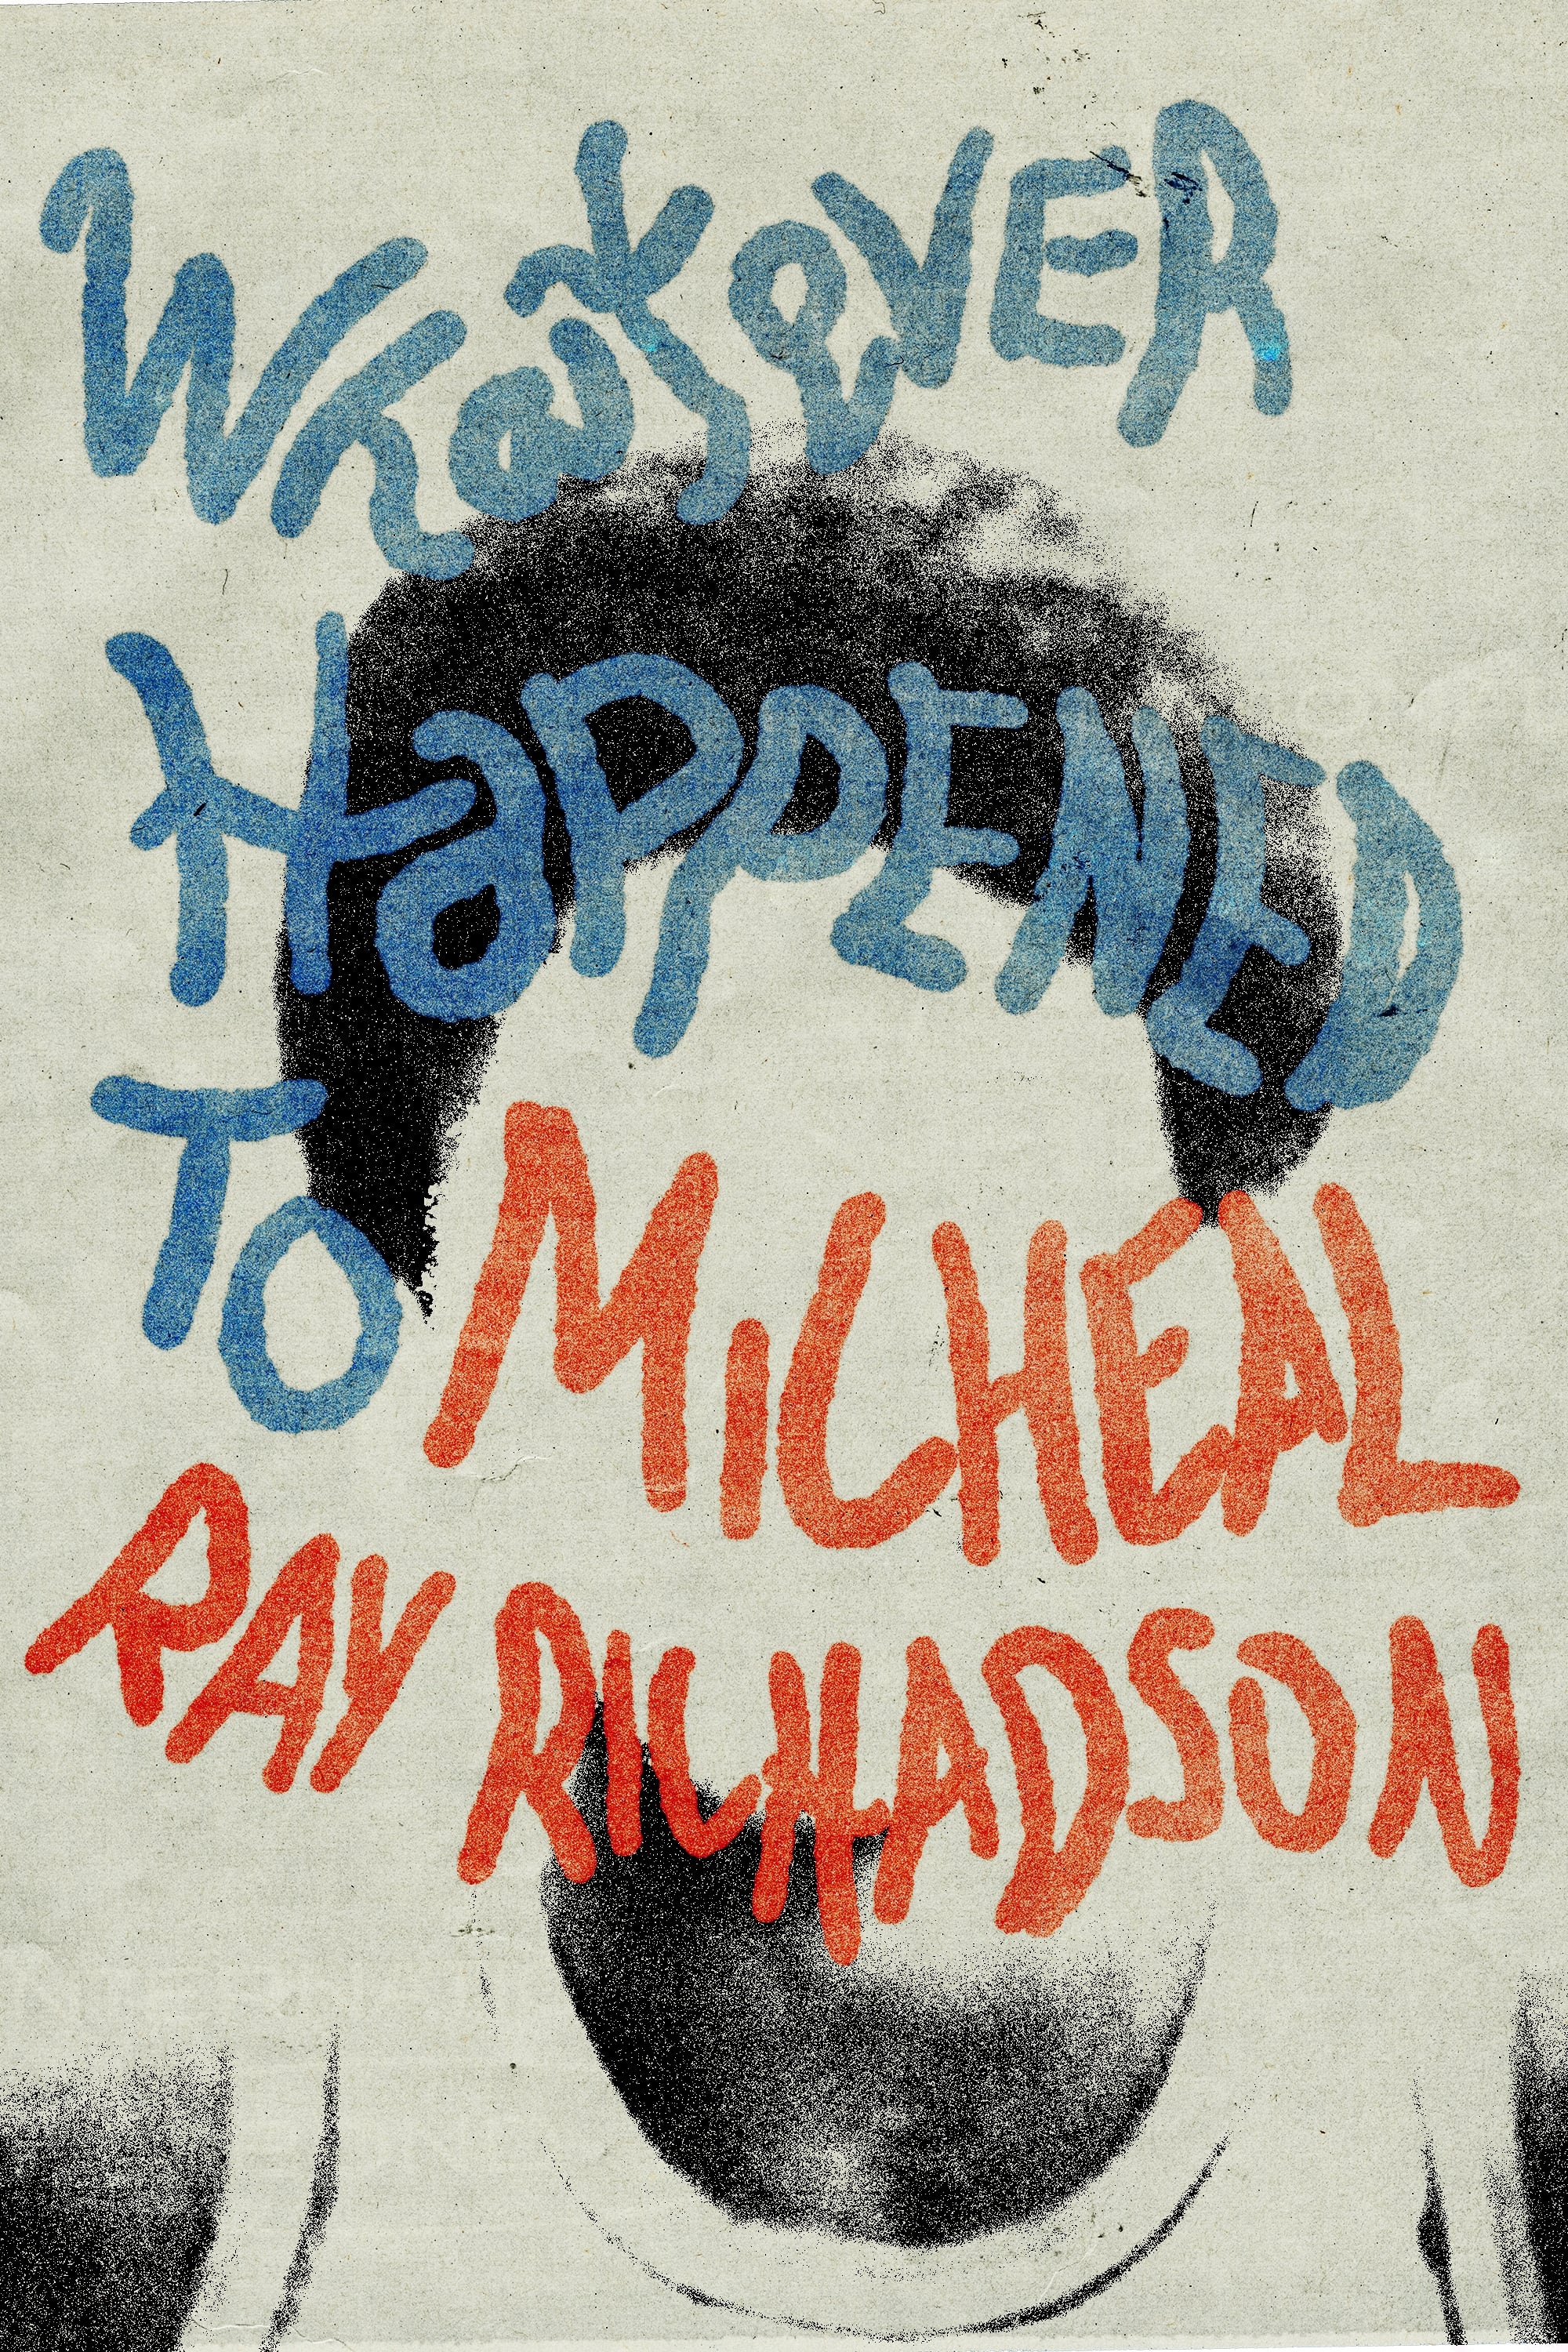 Whatever Happened to Micheal Ray? (2000)